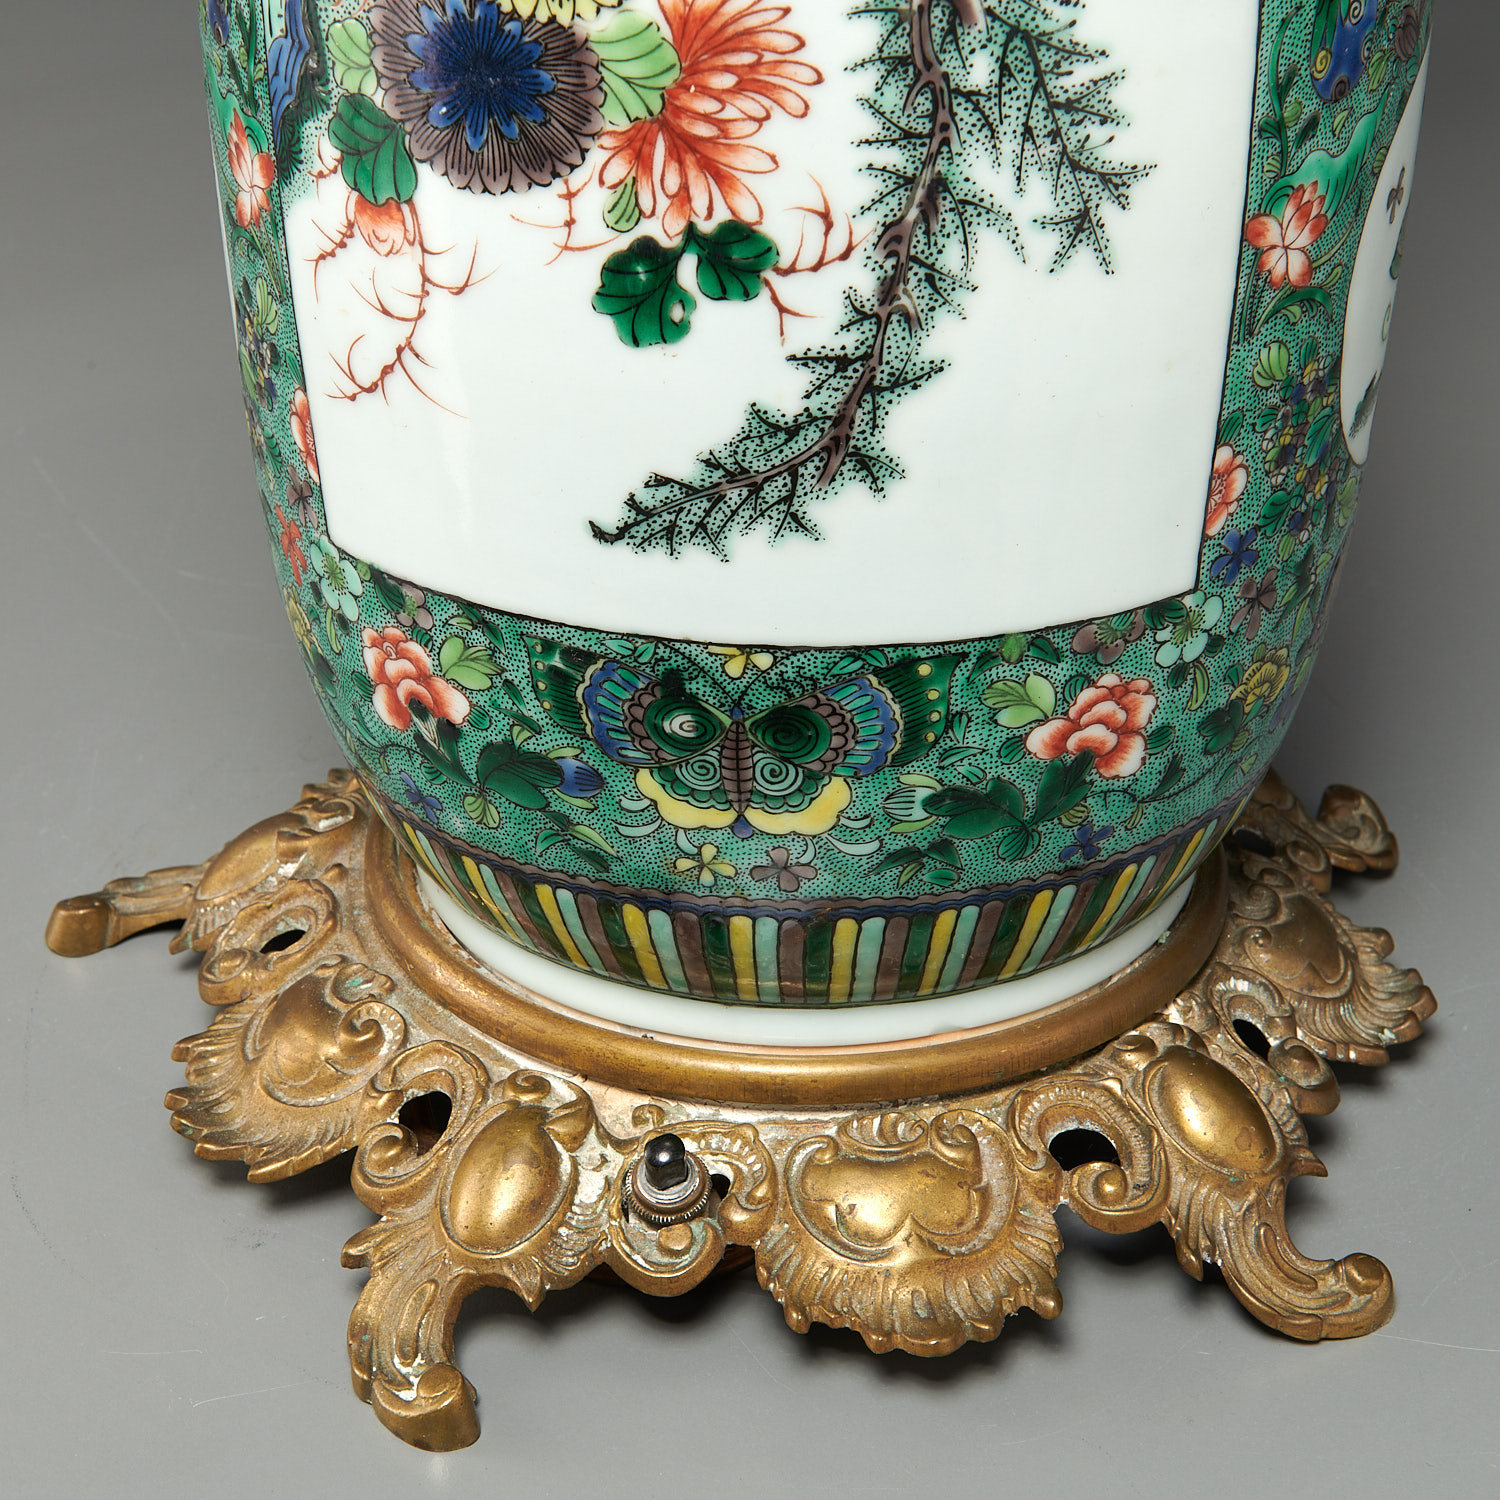 Chinese famille verte Rouleau vase lamp - Image 2 of 8